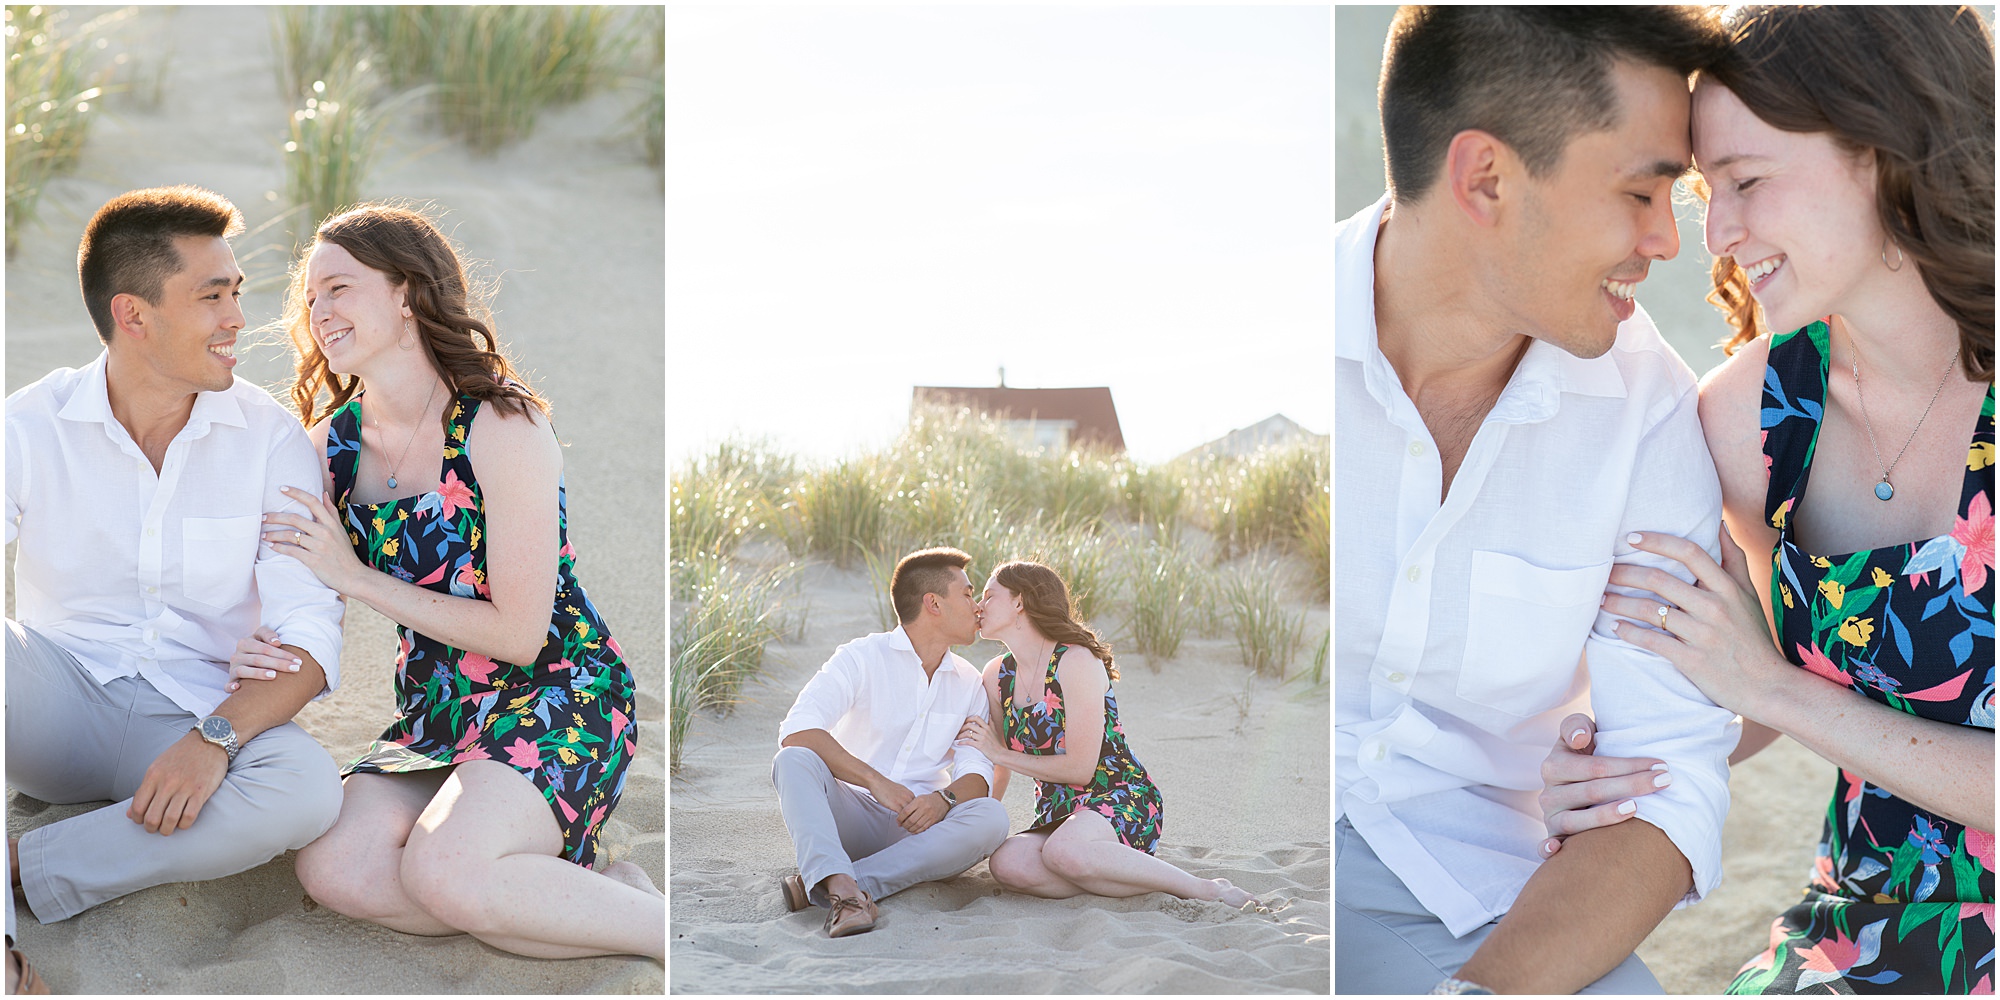 Bradley Beach Engagement Session on the Jersey Shore